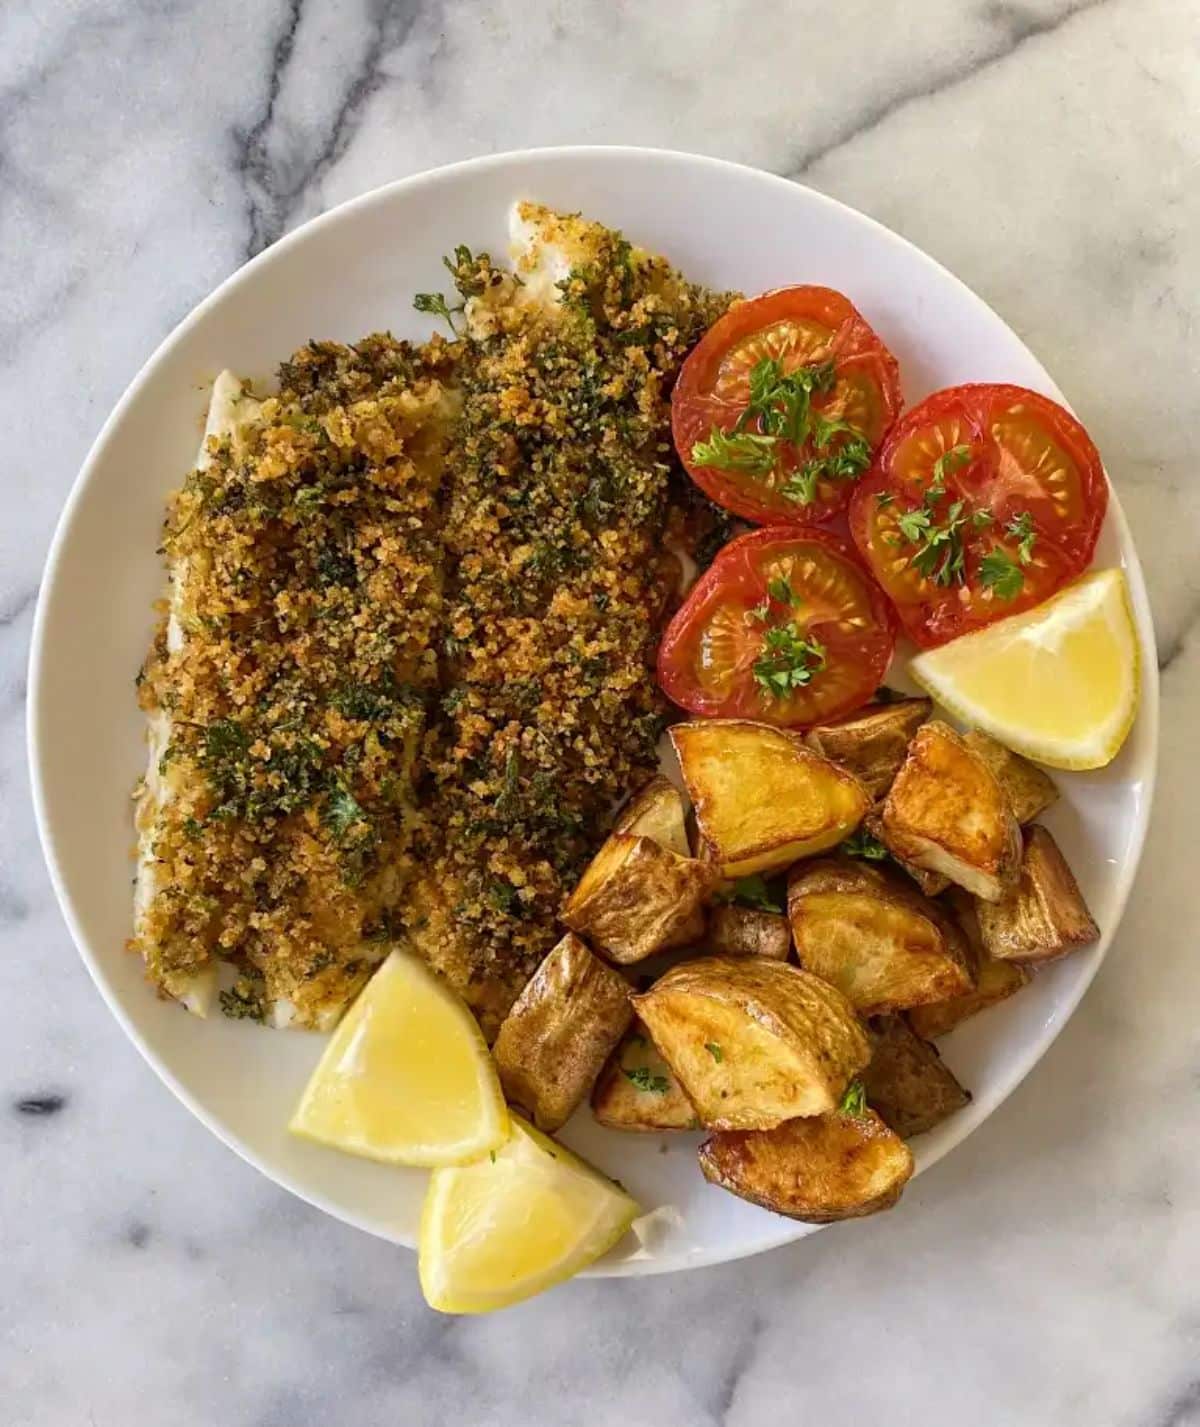 Crispy Baked Fish with Lemony Herbed Breadcrumbs with potatoes, tomatoes on a white plate.